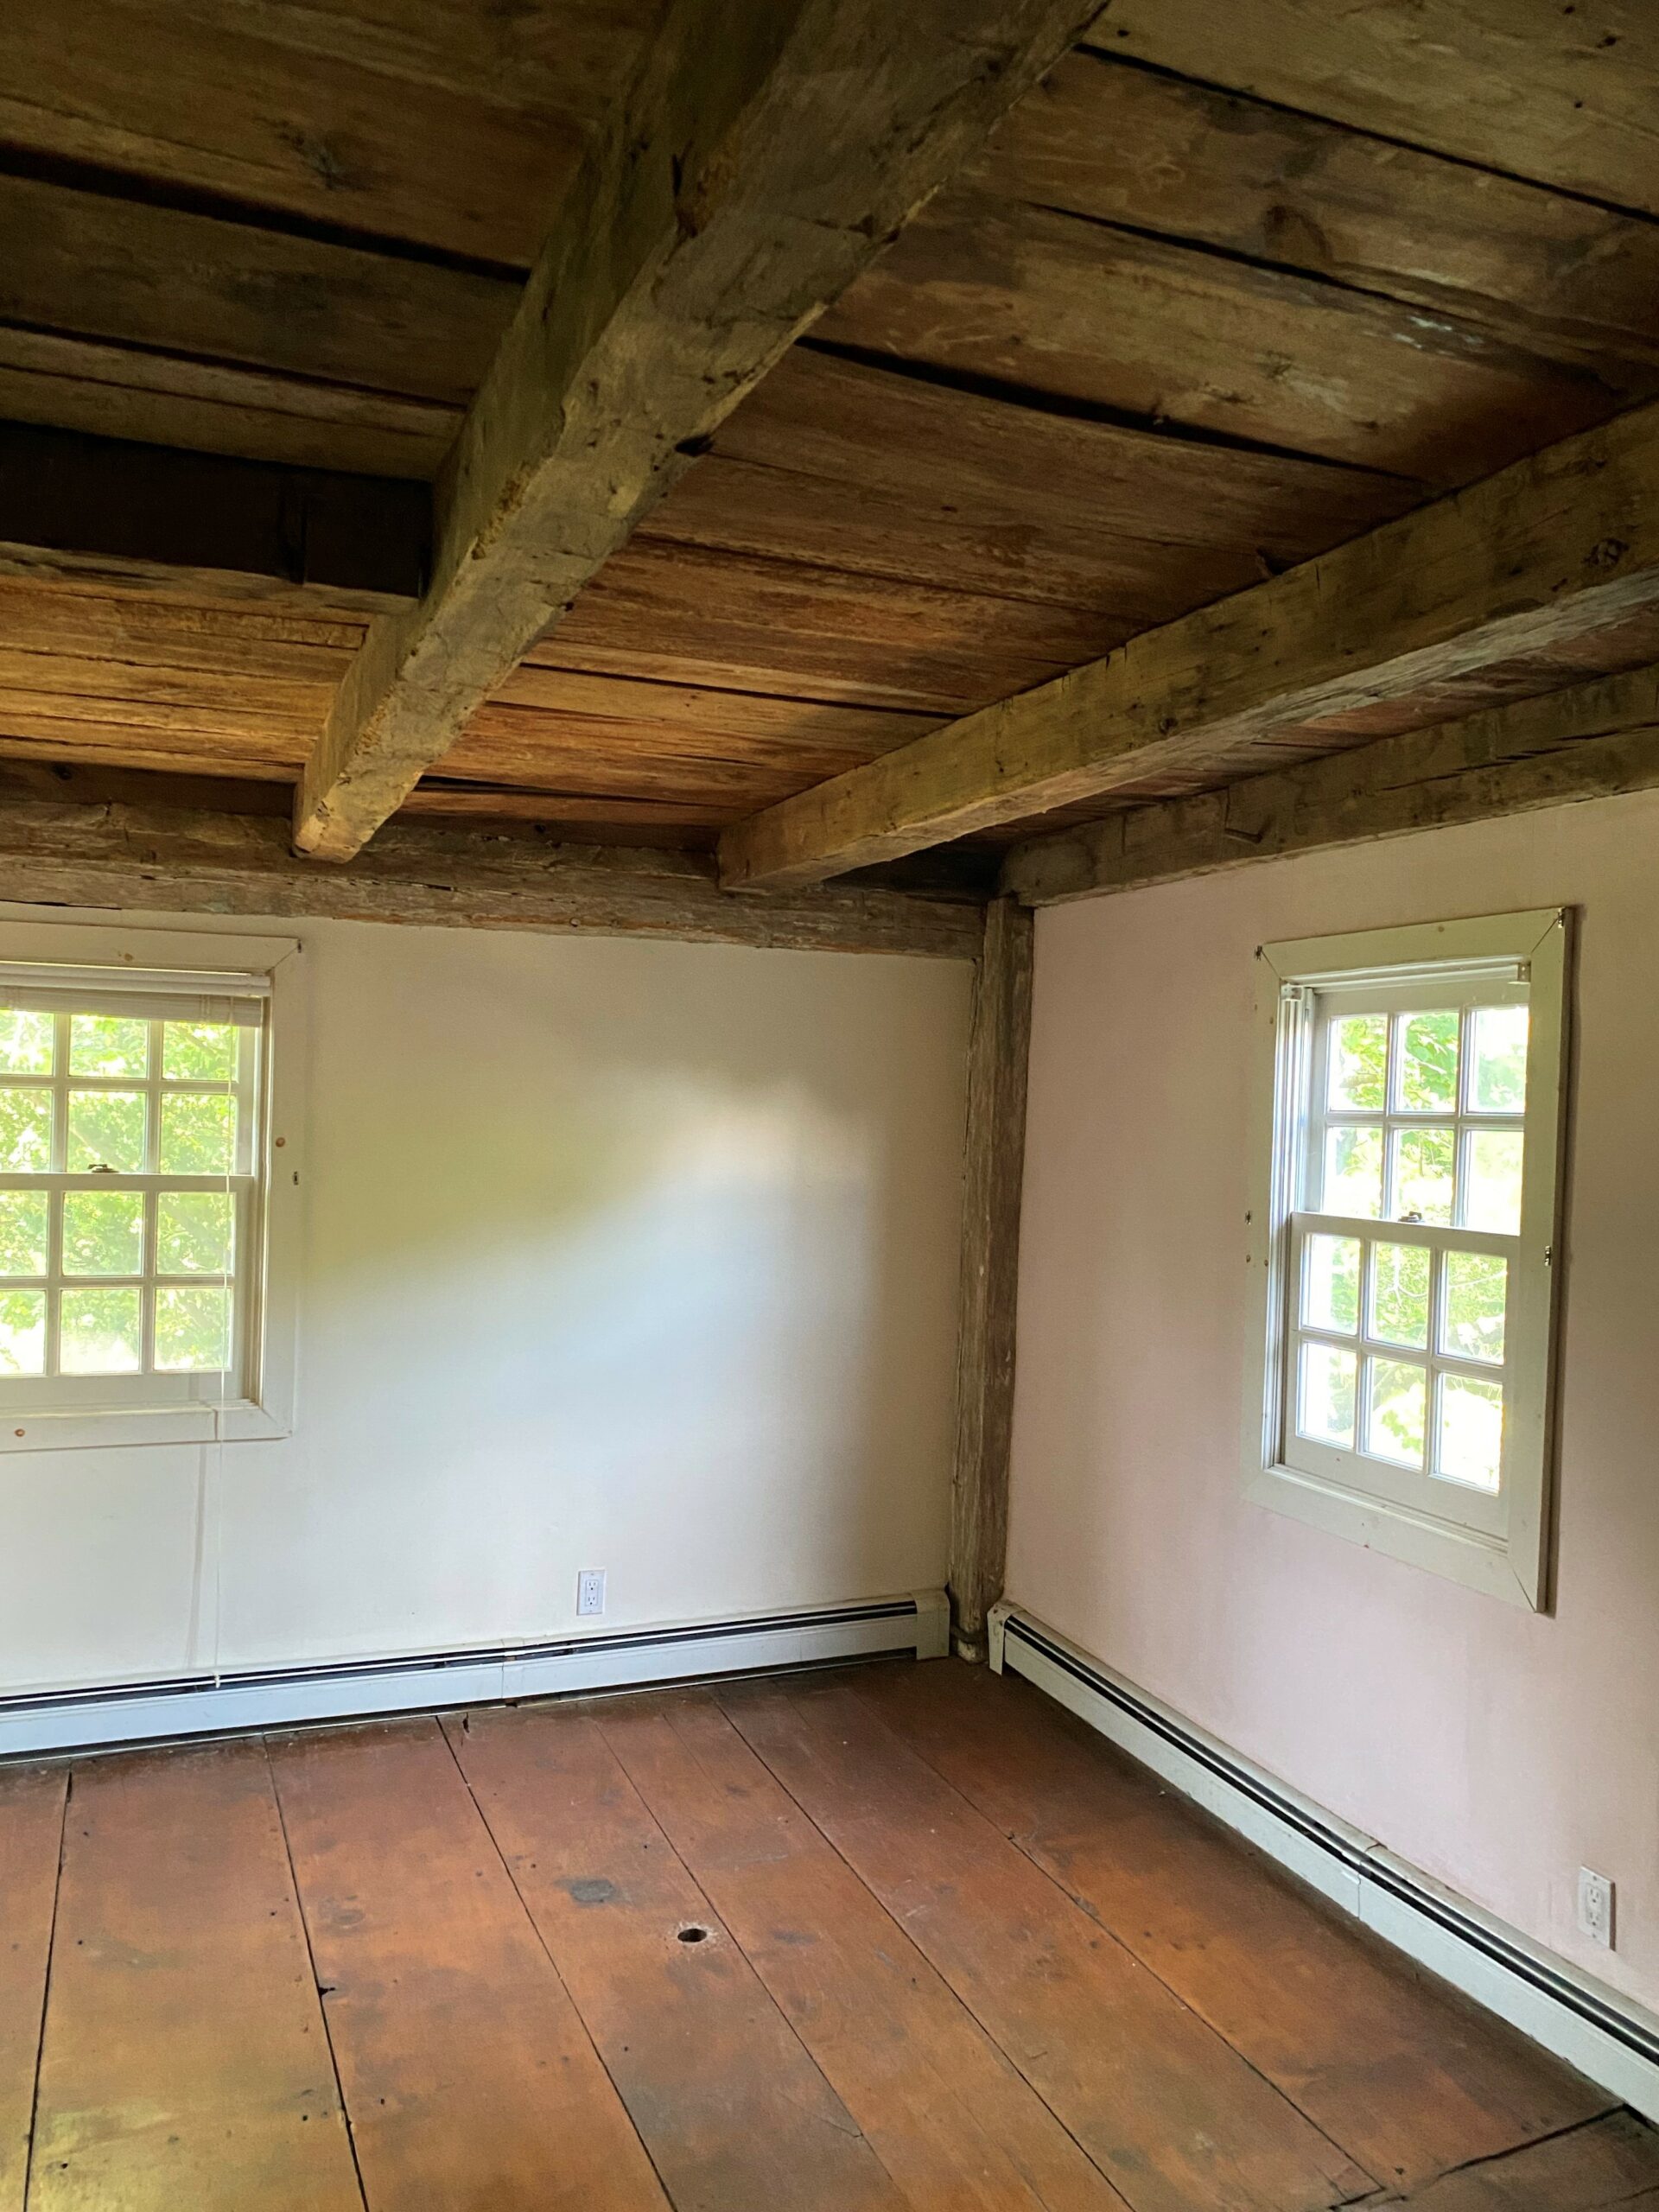 An interior view of exposed beams of the John Sandford House in Bridgehampton, which was taken apart in July. Southampton Town officials hope it will be reconstructed elsewhere in town.